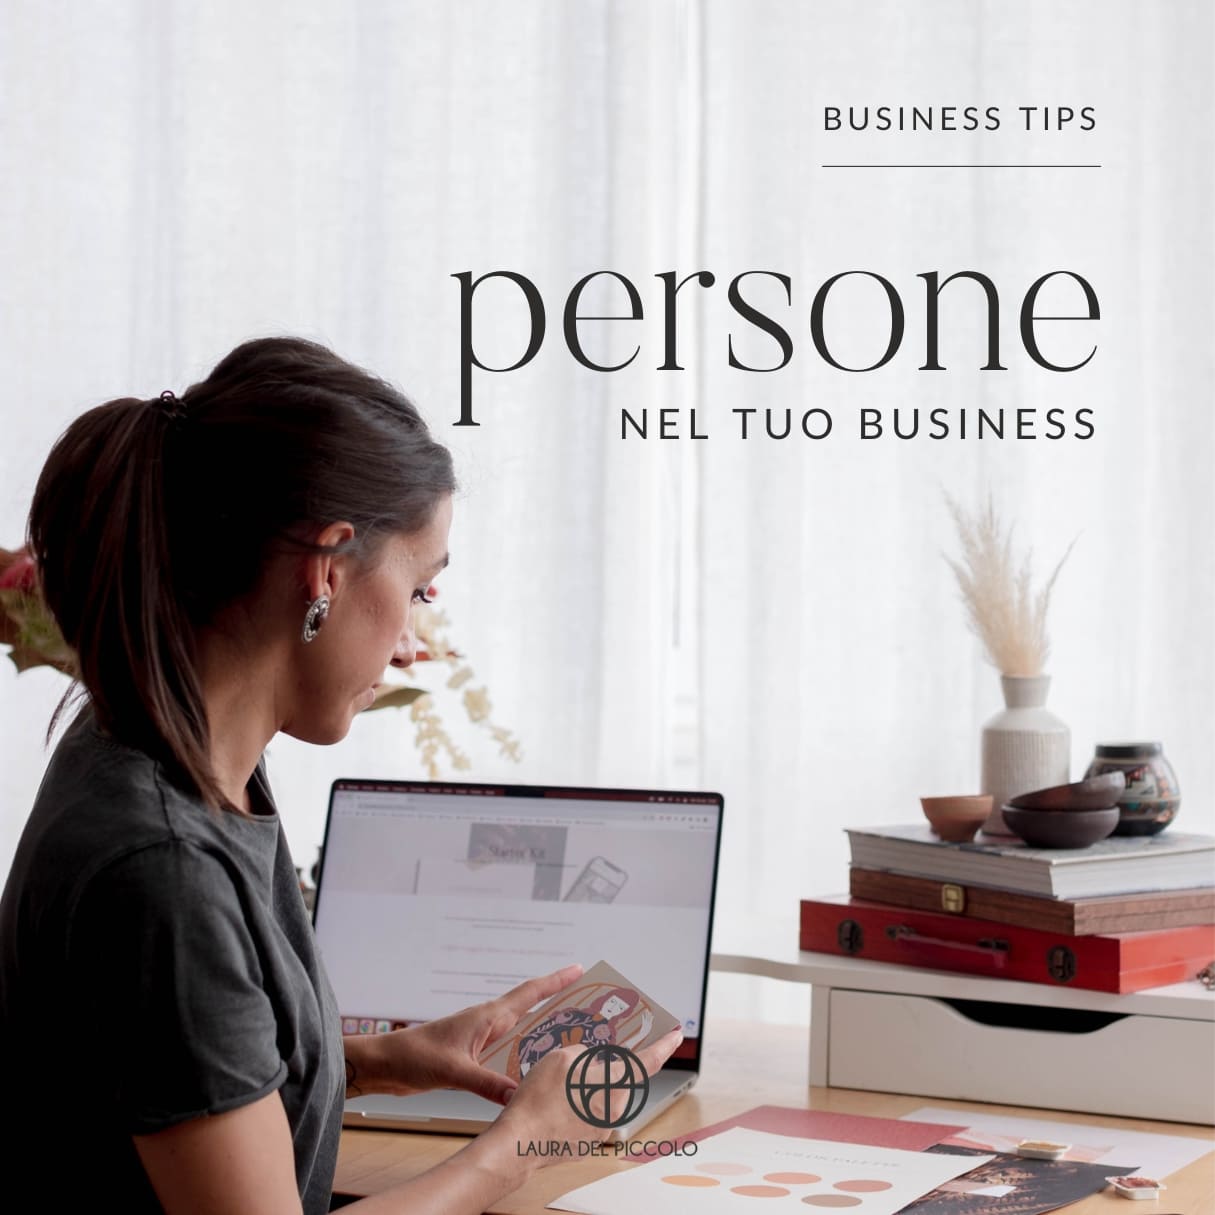 Business tips - Persone nel tuo business